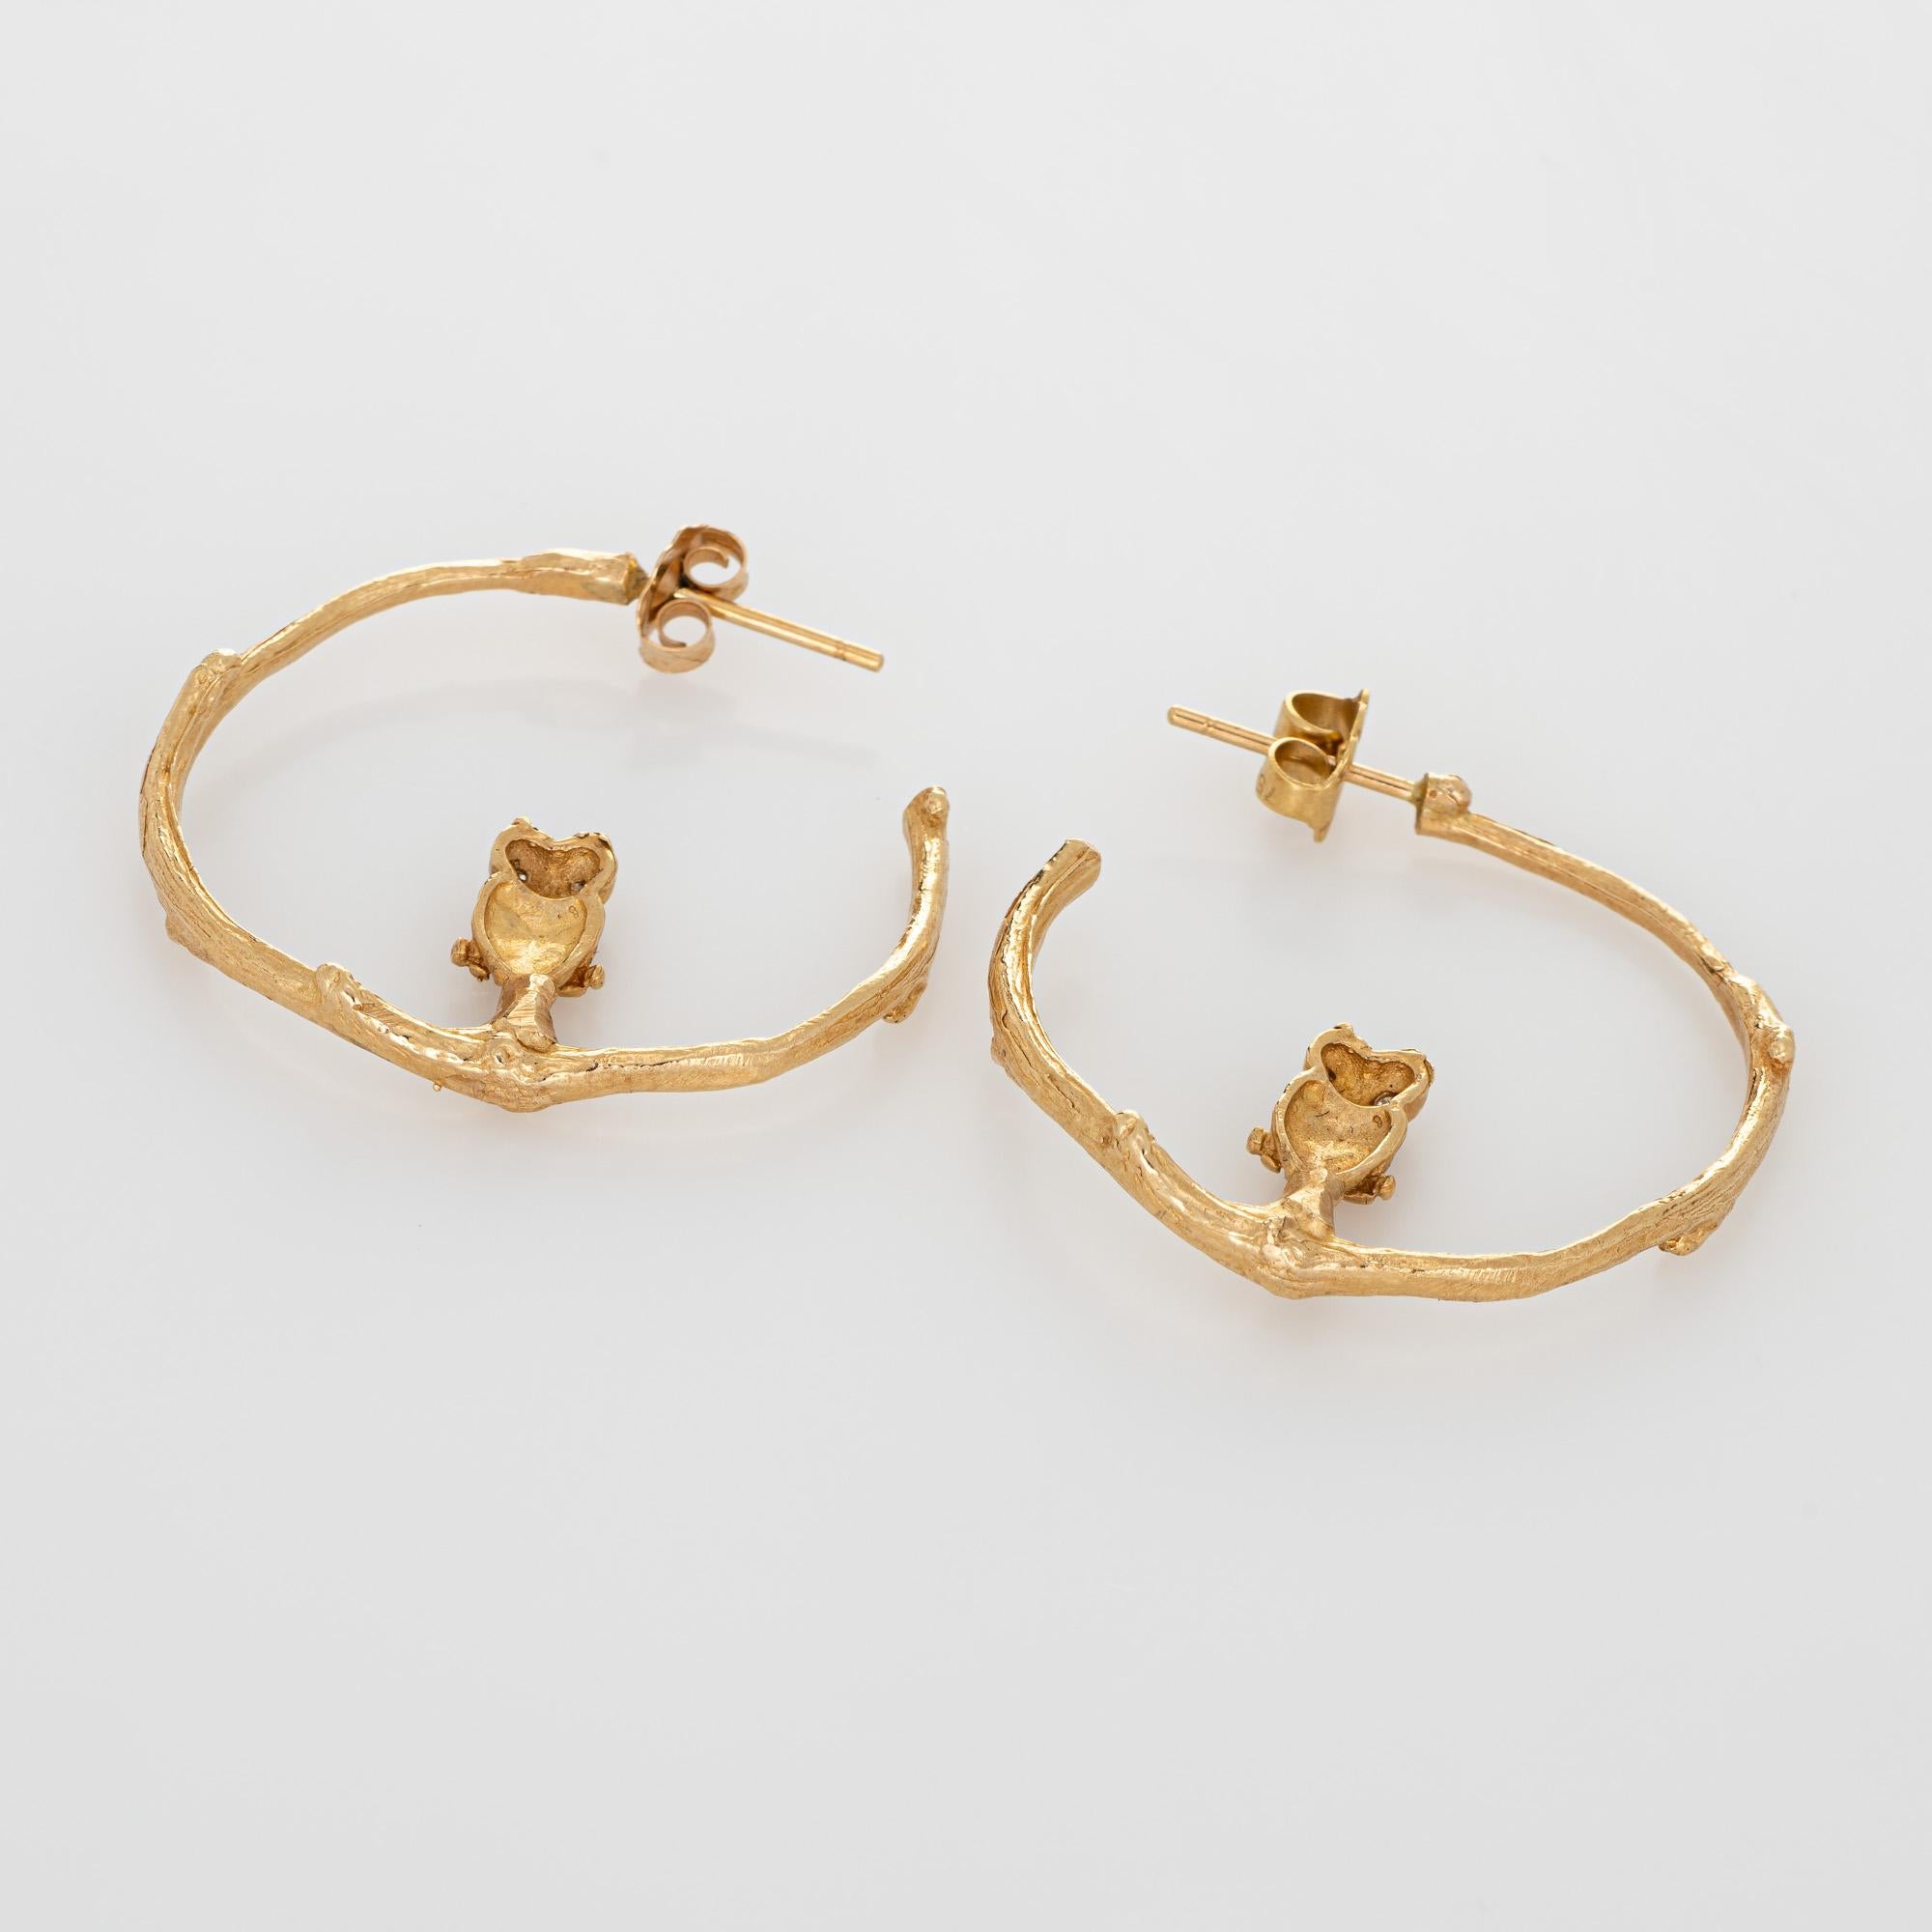 Distinct and stylish pair of diamond owl hoop earrings crafted in 14k yellow gold. 

Four round brilliant cut diamonds total an estimated 0.02 carats (estimated at I-J color and SI1-I1 clarity).  

The charming earrings feature two owls perched on a